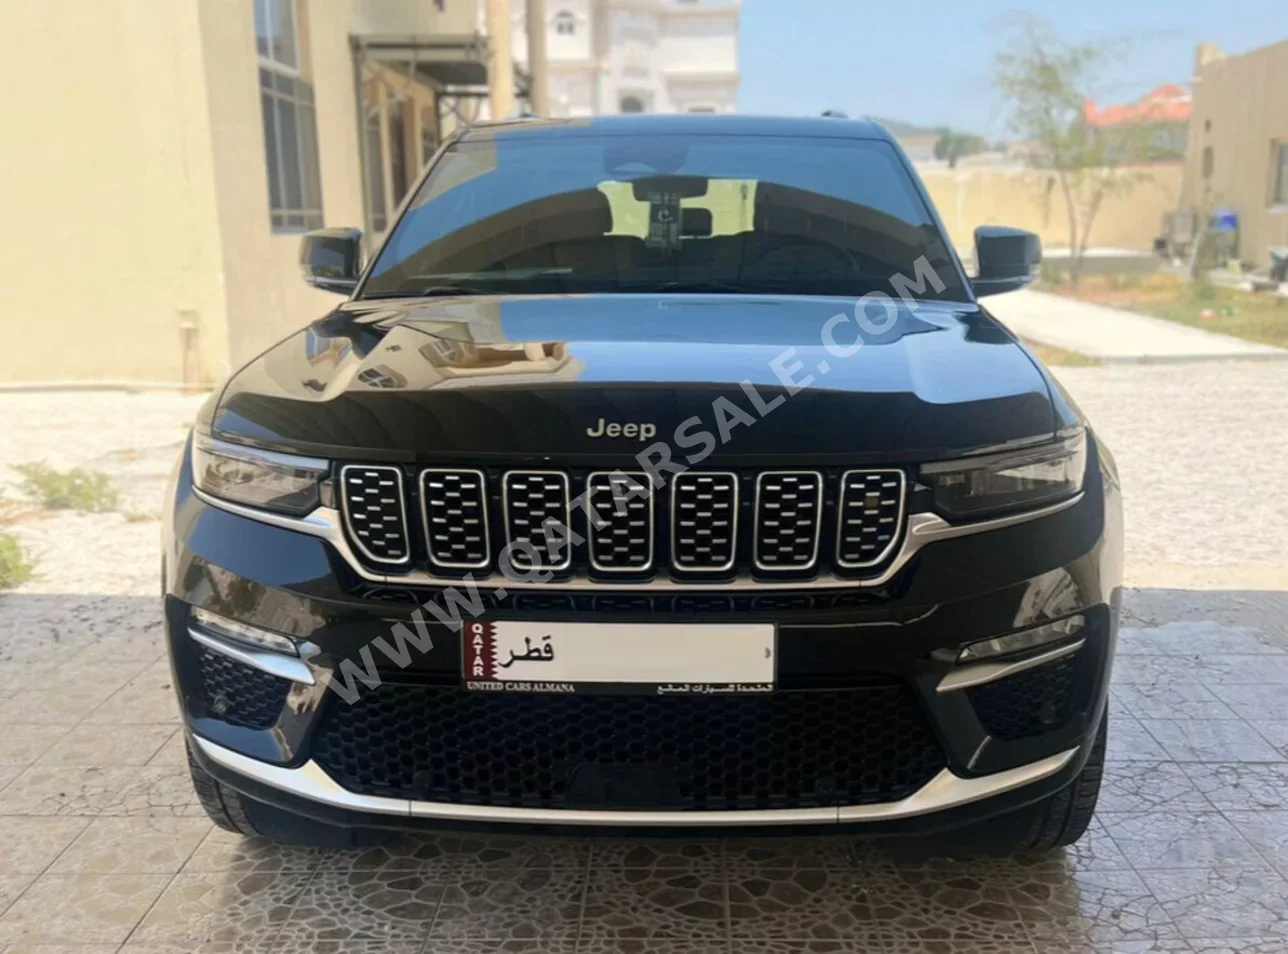 Jeep  Grand Cherokee  Summit  2023  Automatic  22,000 Km  6 Cylinder  Four Wheel Drive (4WD)  SUV  Black  With Warranty